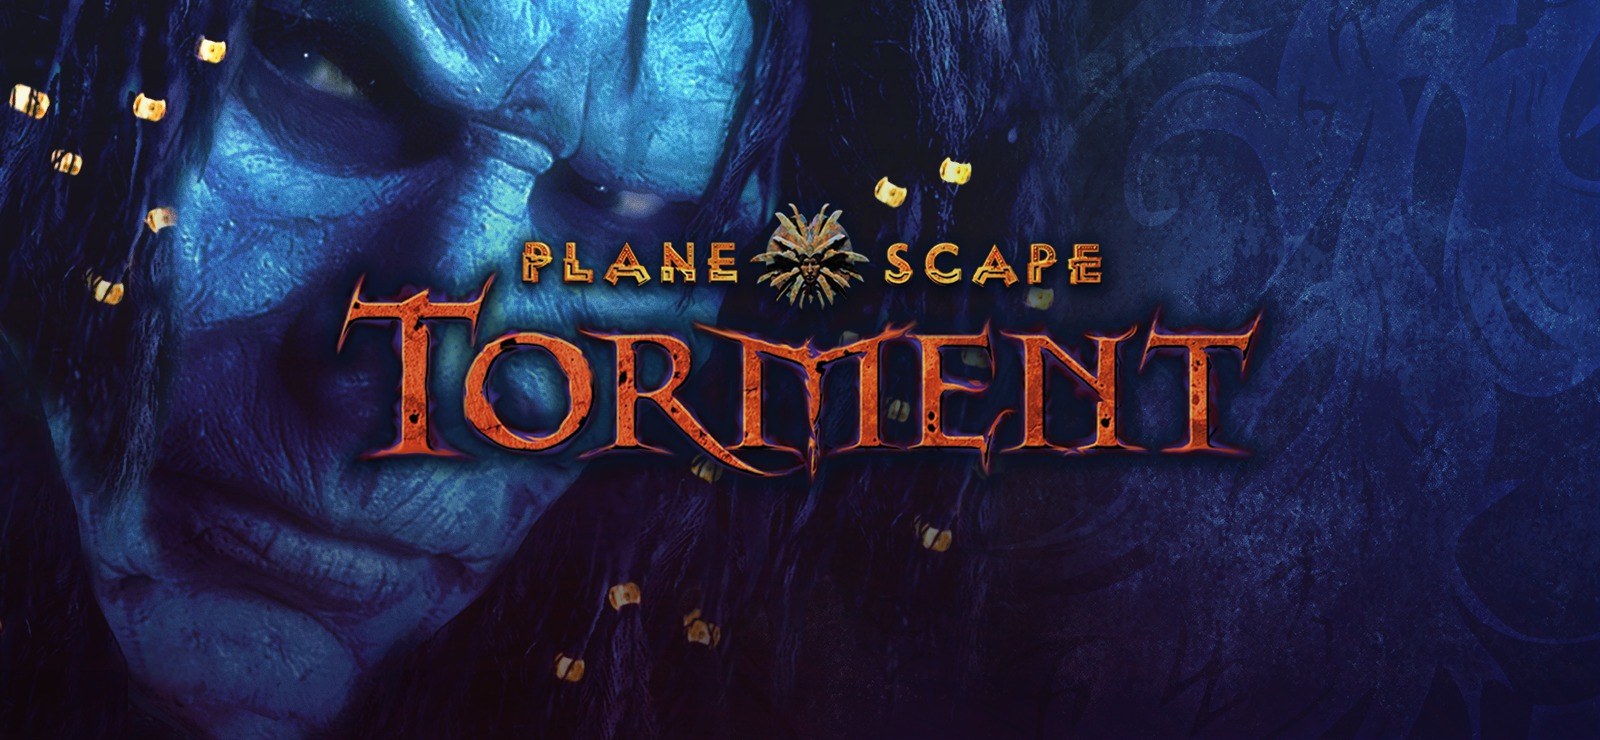 Hall of Fame Review – Planescape: Torment (1999)